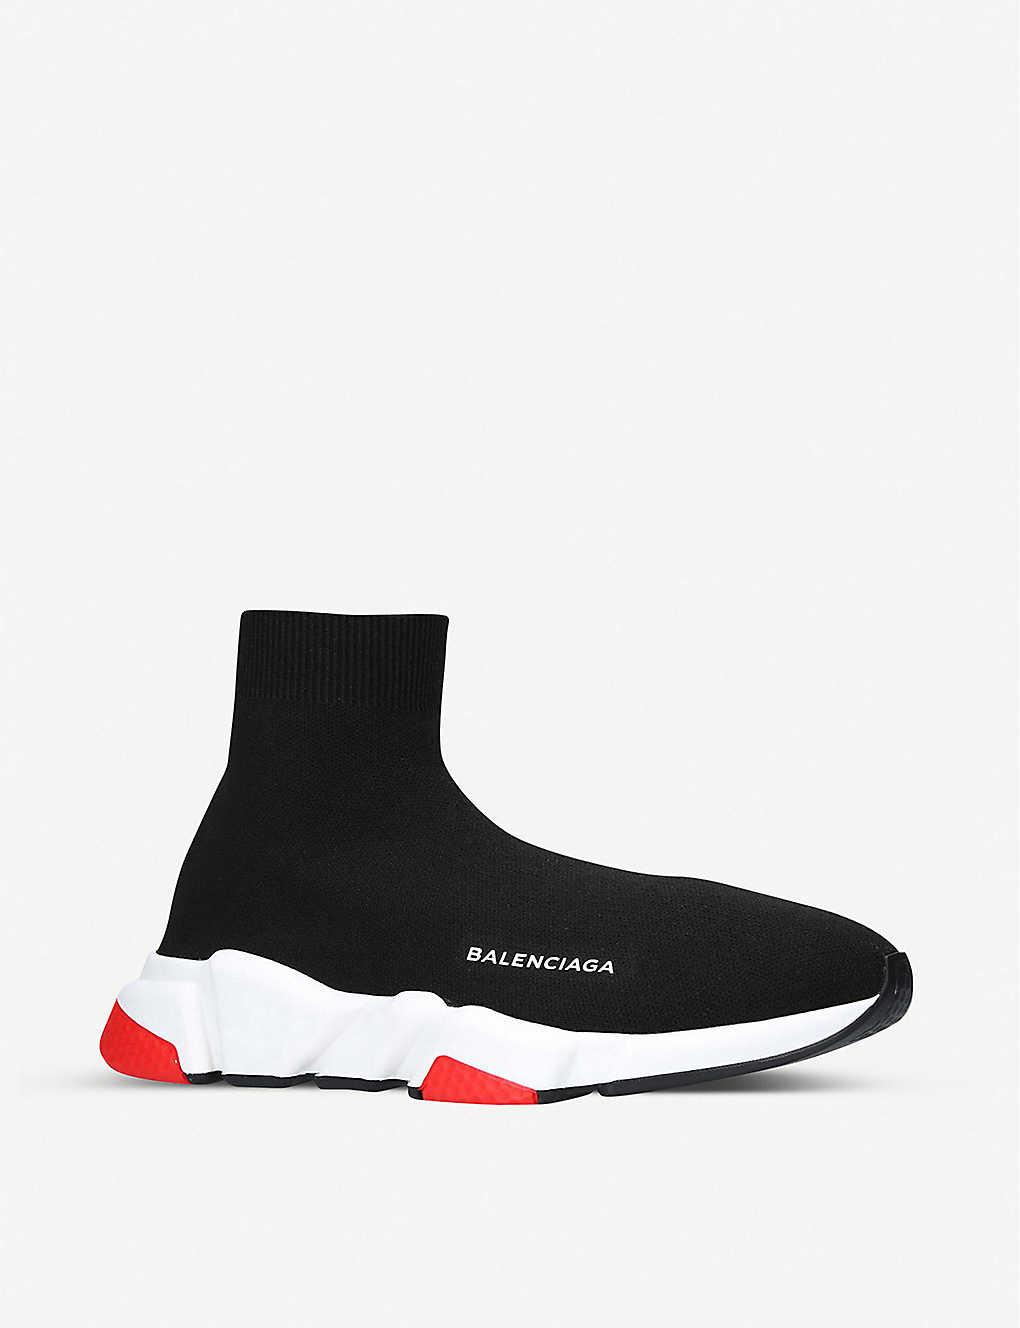 Balenciaga Synthetic Speed Stretch-knit Trainers in Black/Red/White ...